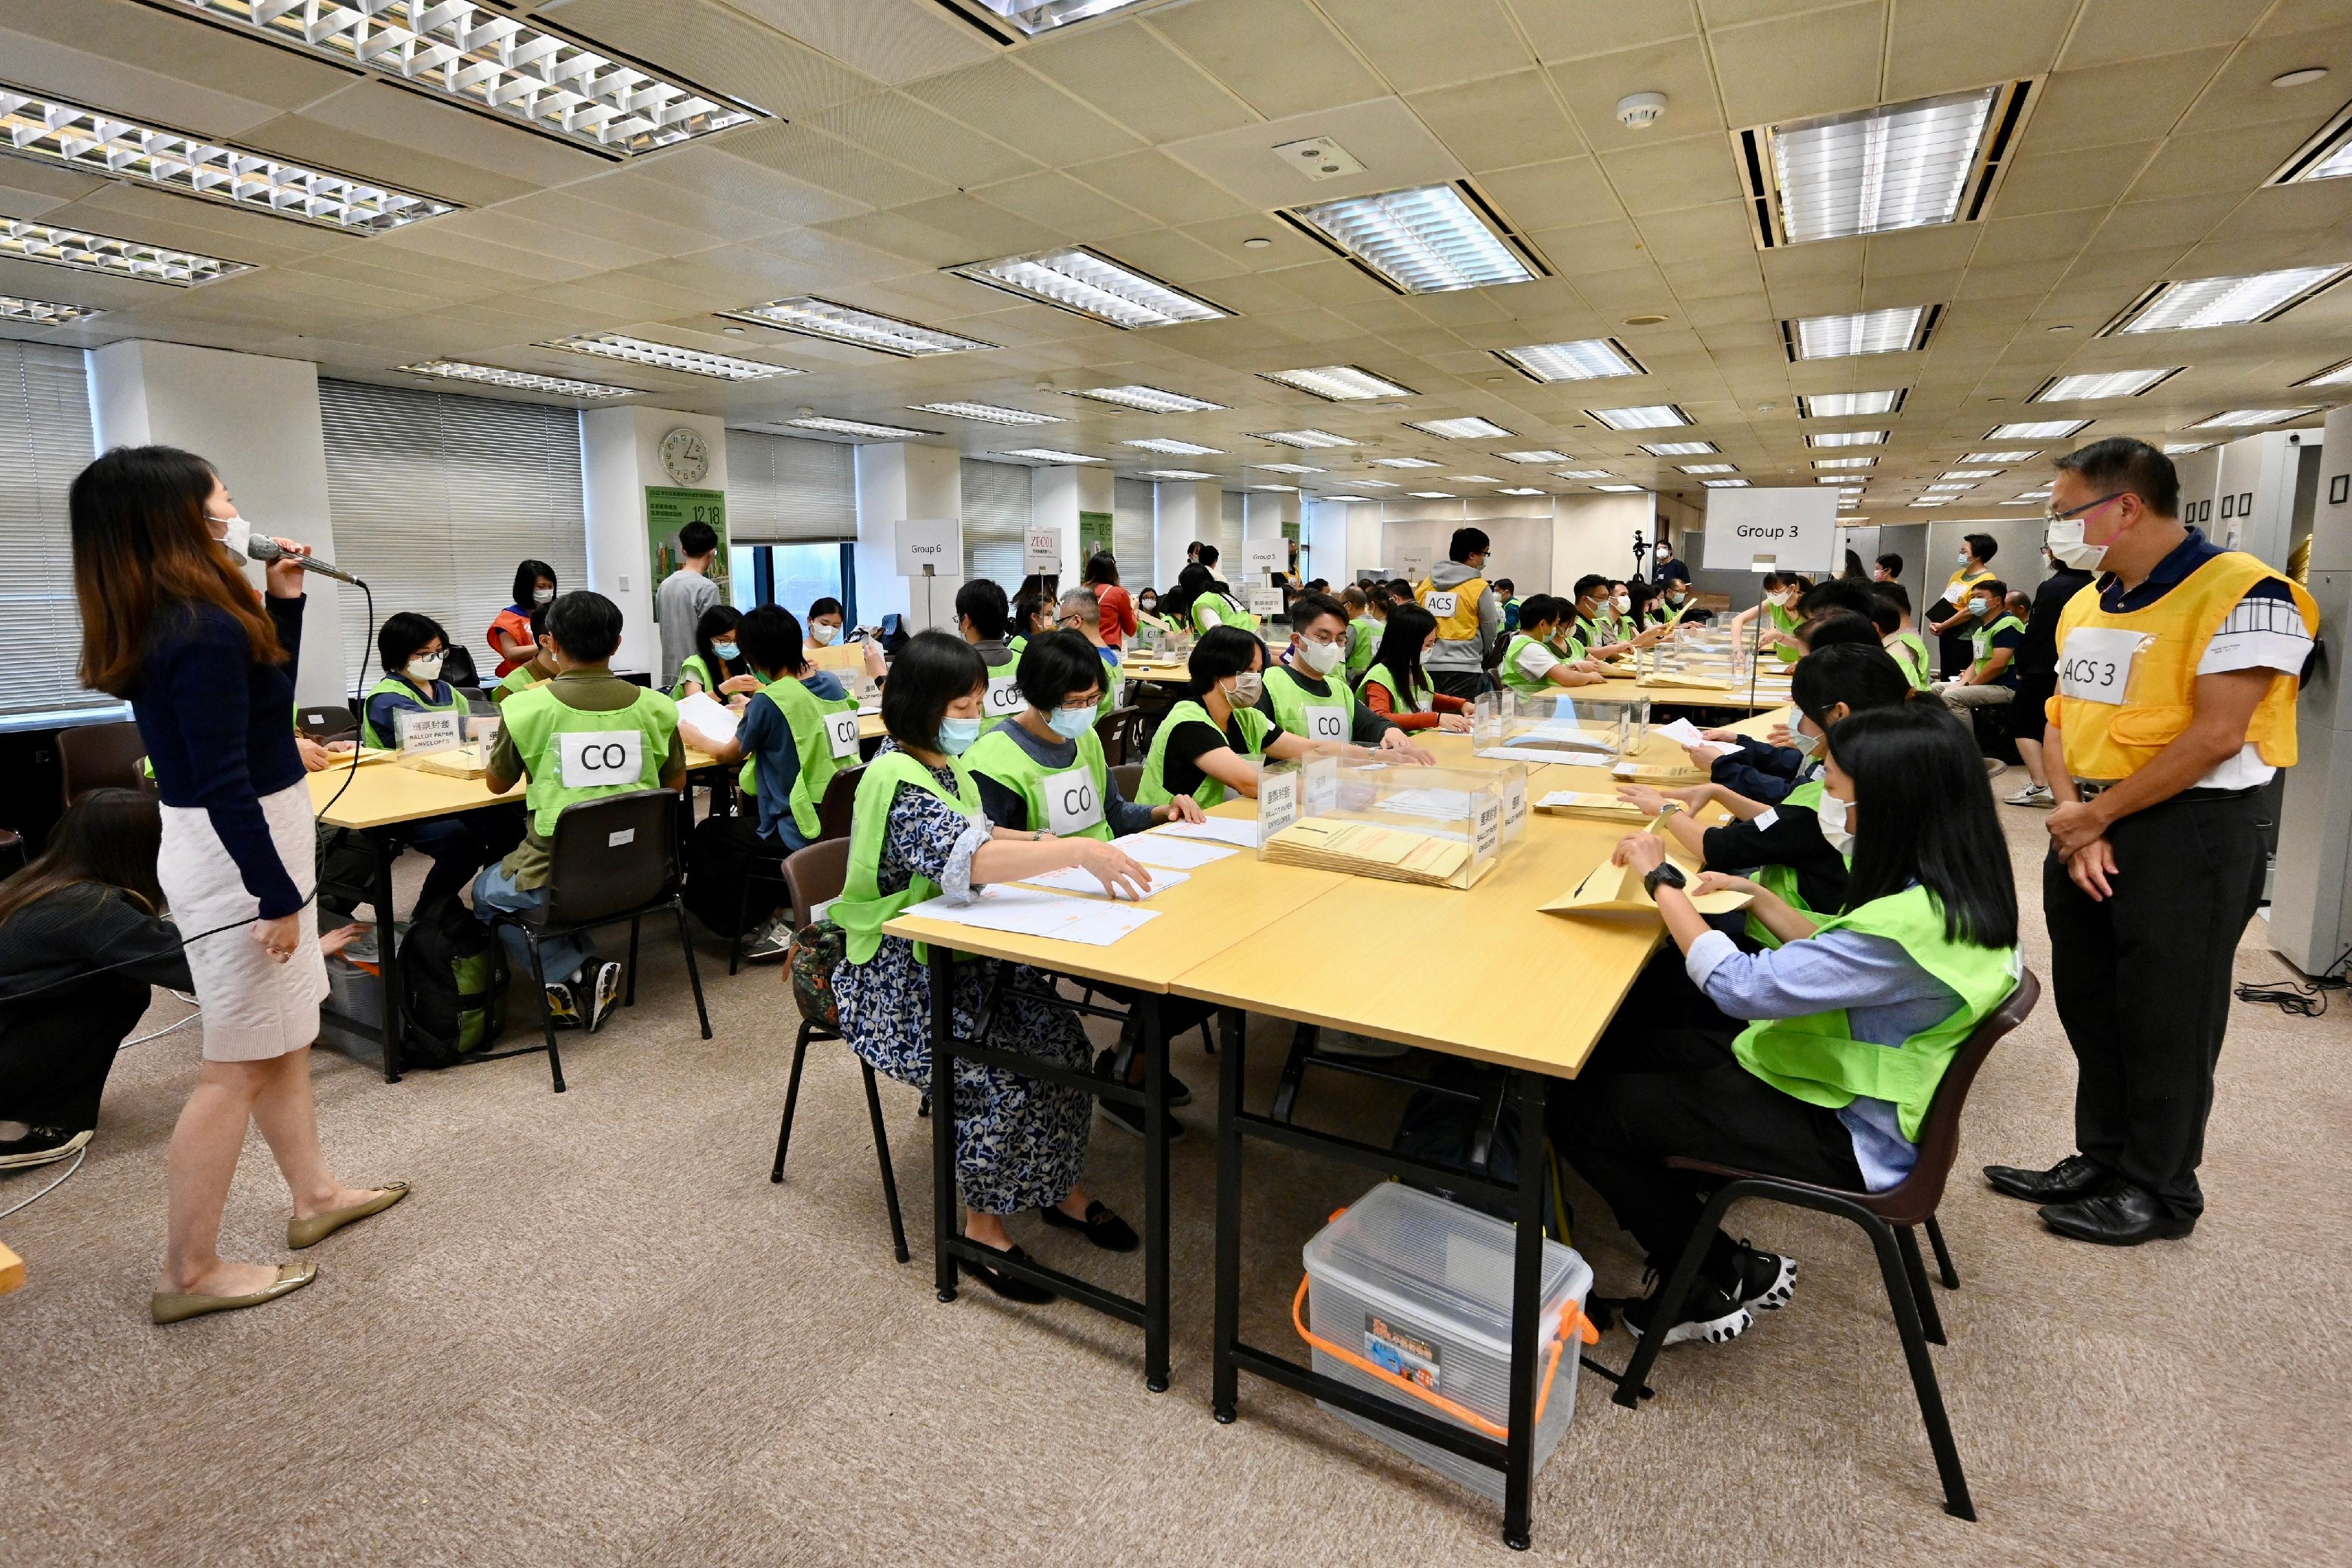 The Registration and Electoral Office (REO) has been conducting various training sessions for staff of the central counting station of the 2022 Legislative Council Election Committee constituency by-election. Photo shows central counting station staff being briefed by REO staff on the counting procedures at a hands-on training session.